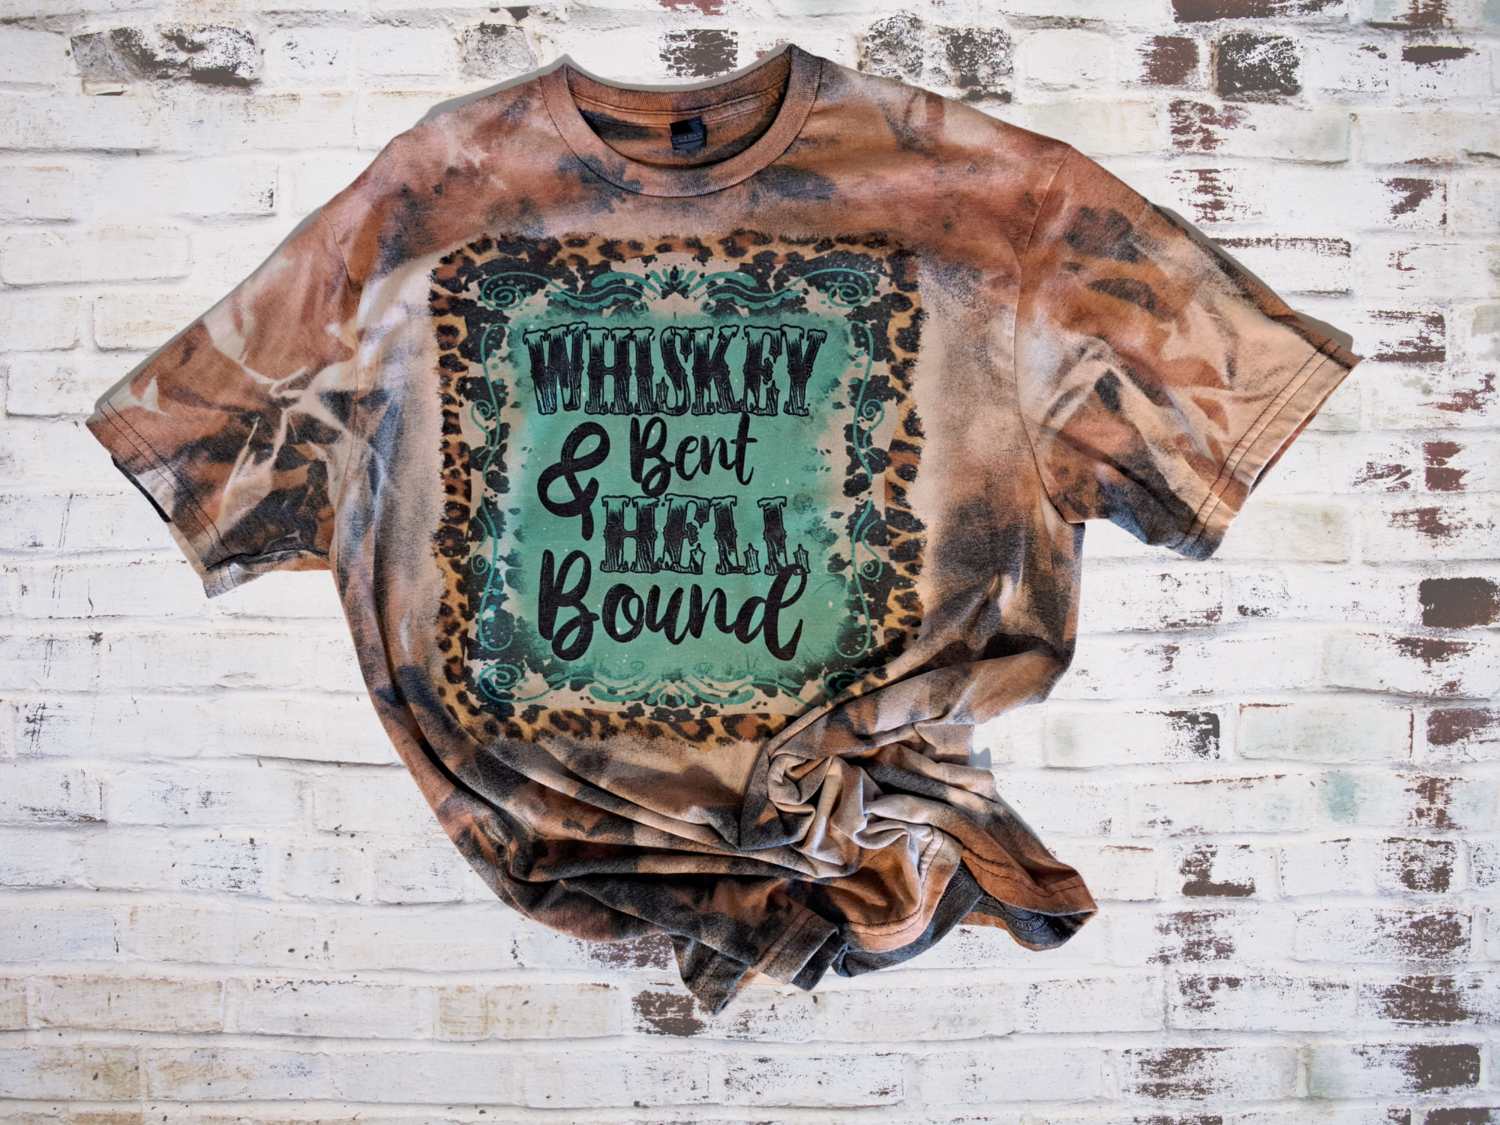 Whiskey Bent and Hell Bound cowhide bleached T-shirt